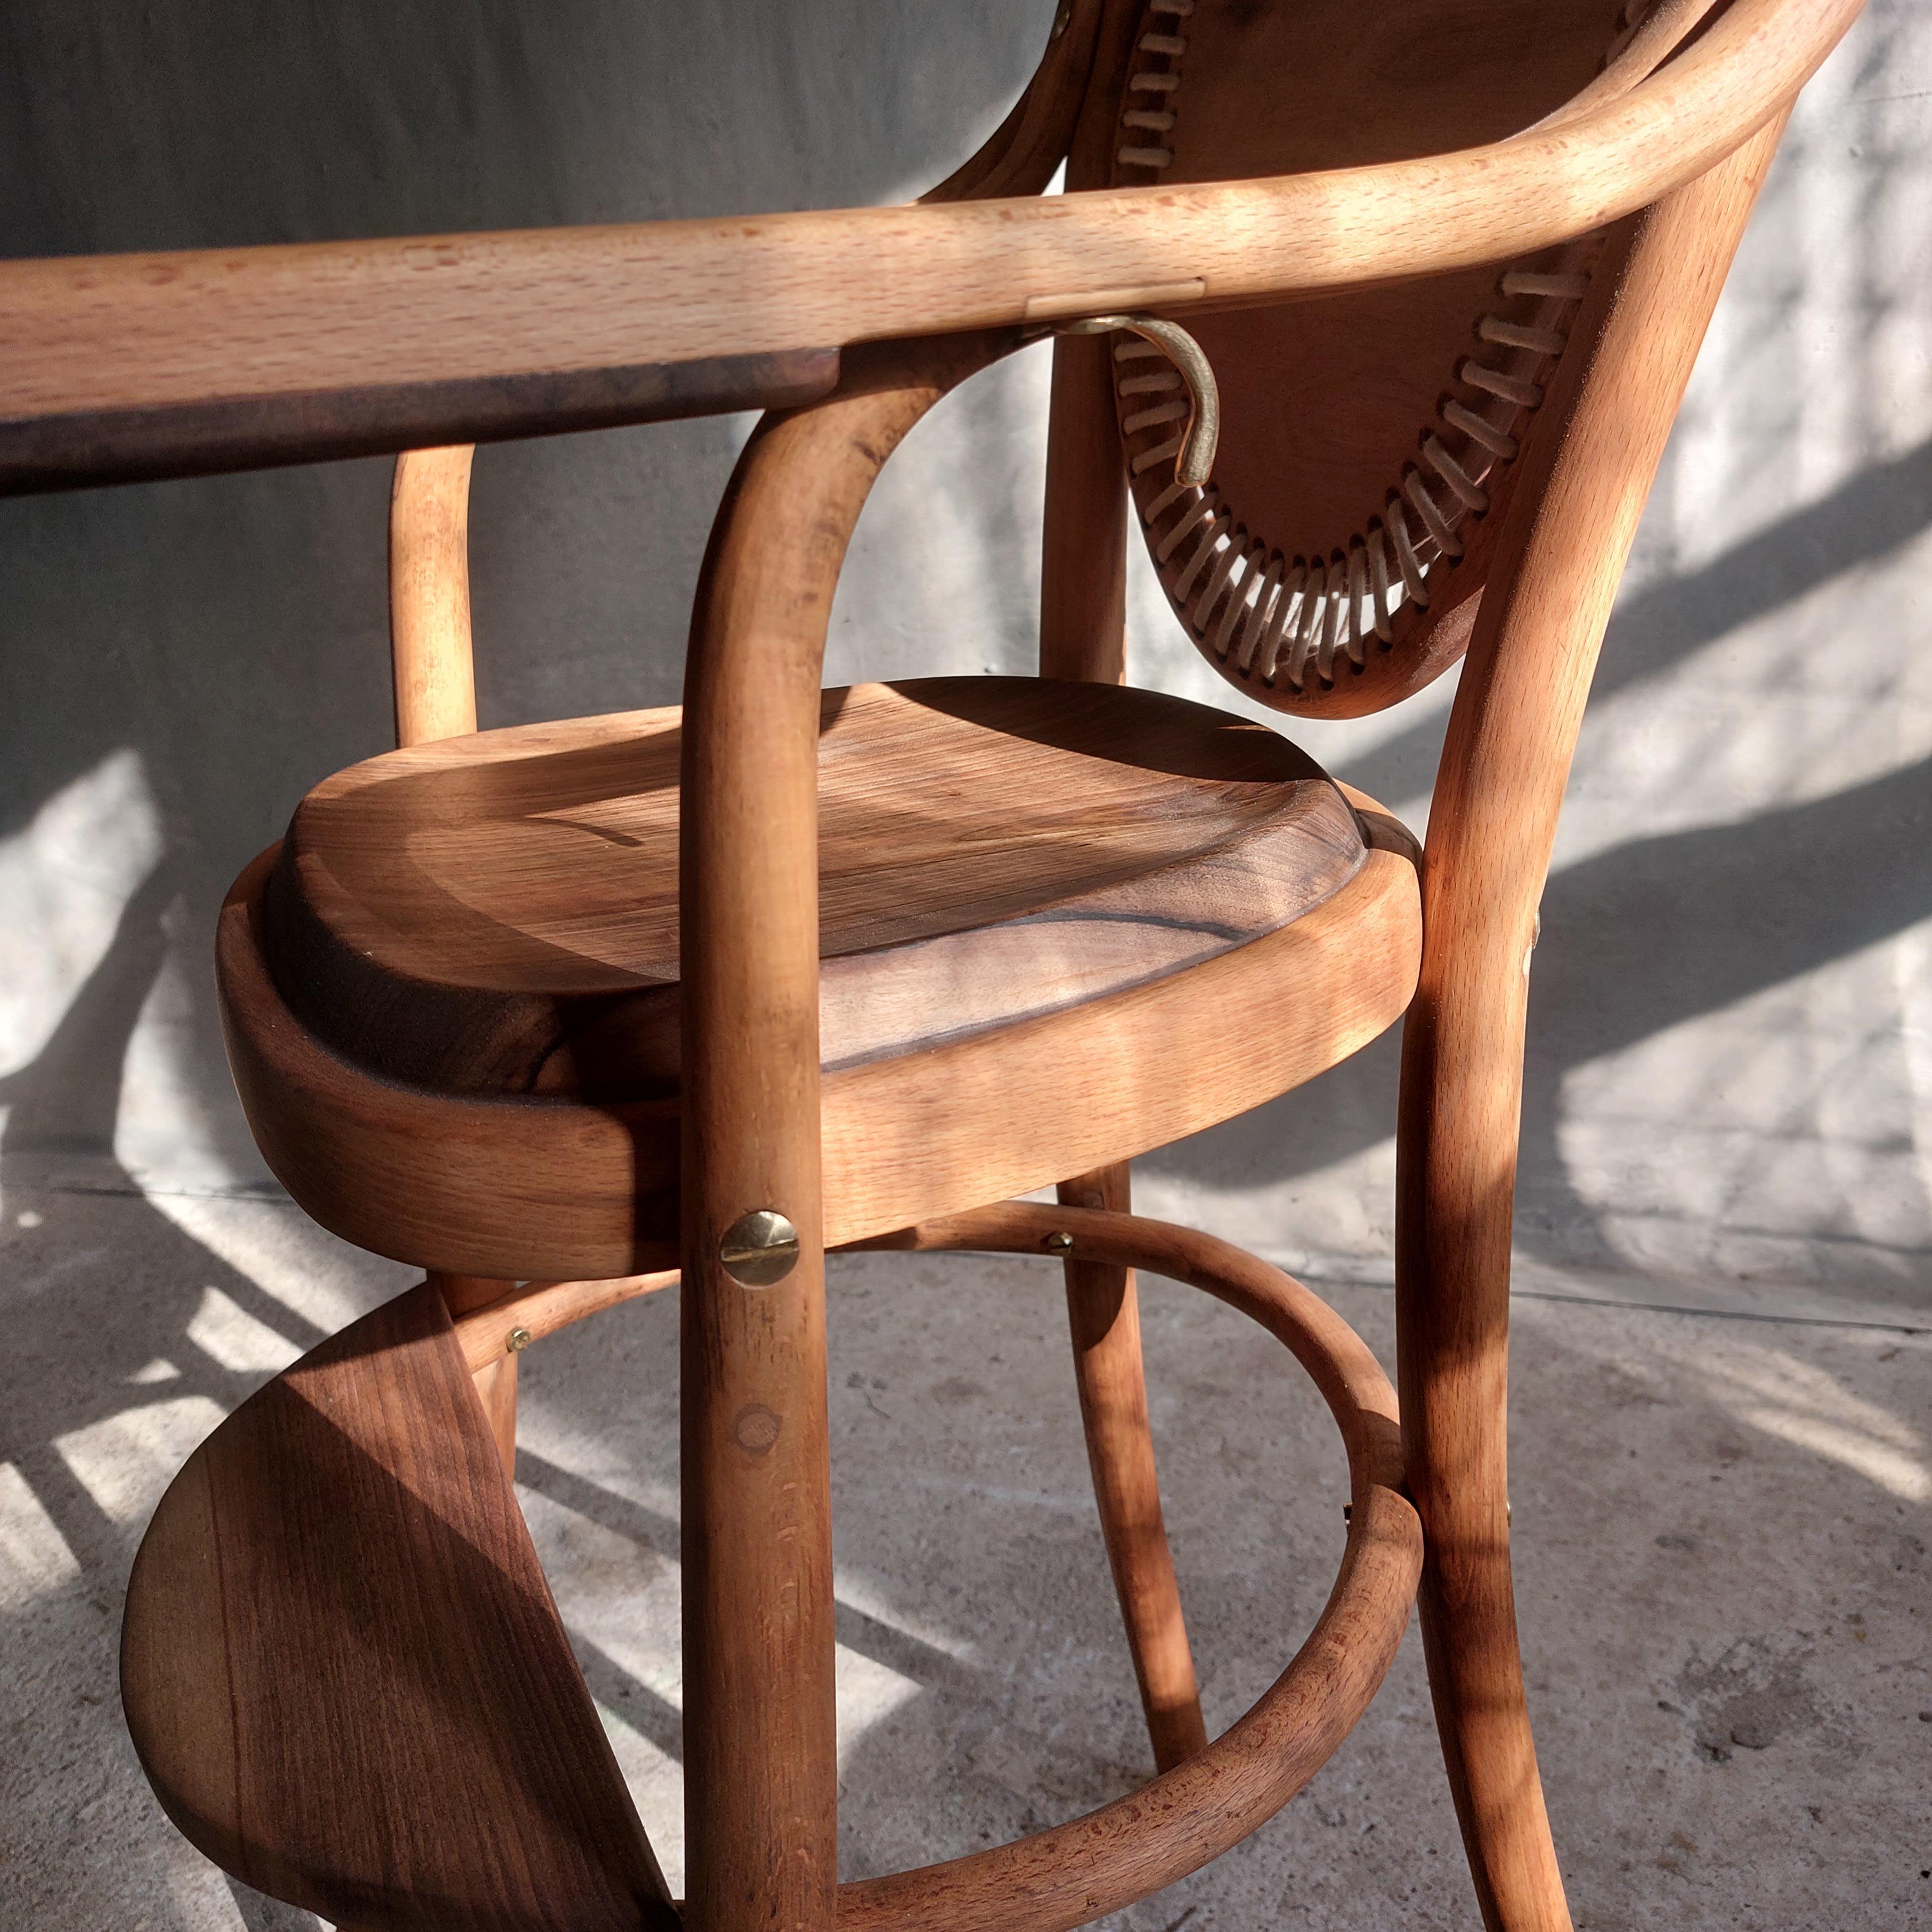 Hand-Carved Thonet Toddler High Chair, Thonet Base, Reinvented Walnut Seat and a Backrest